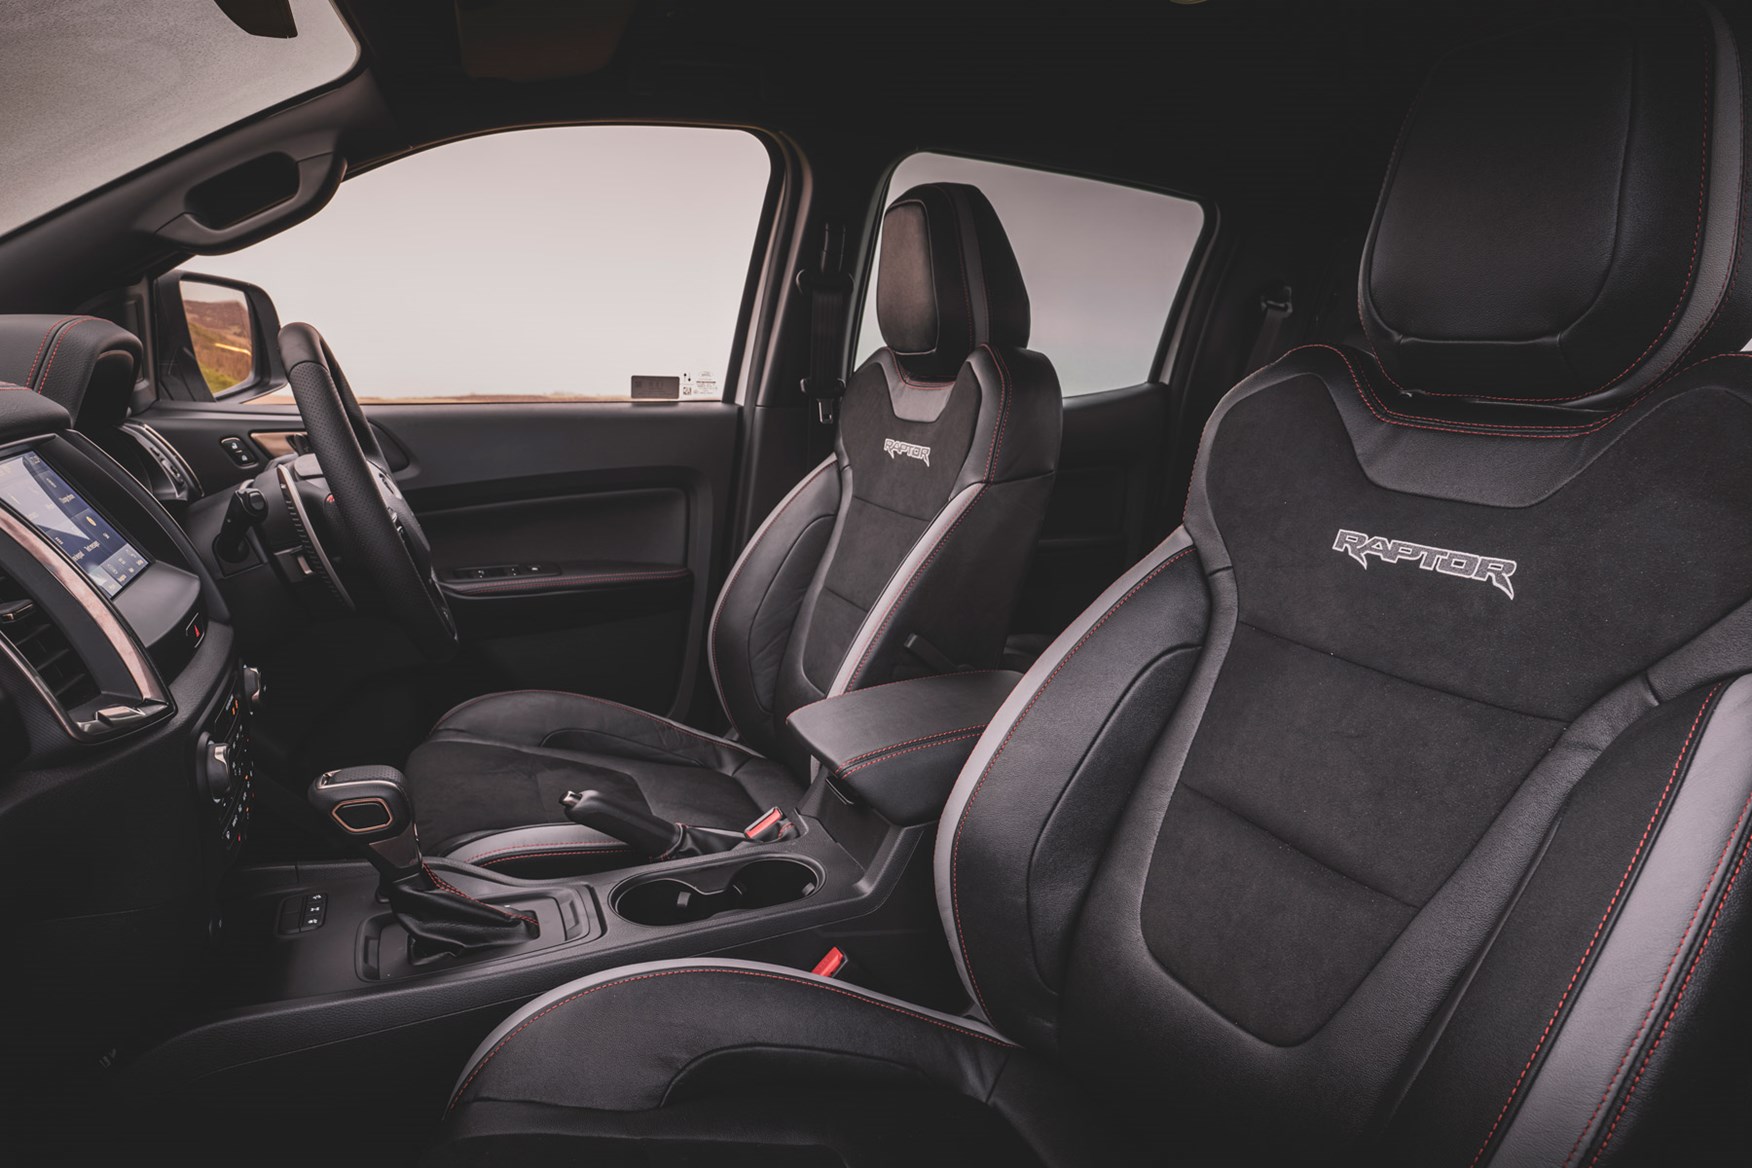 Ford Ranger Raptor review - Special Edition interior, front seats with red stitching